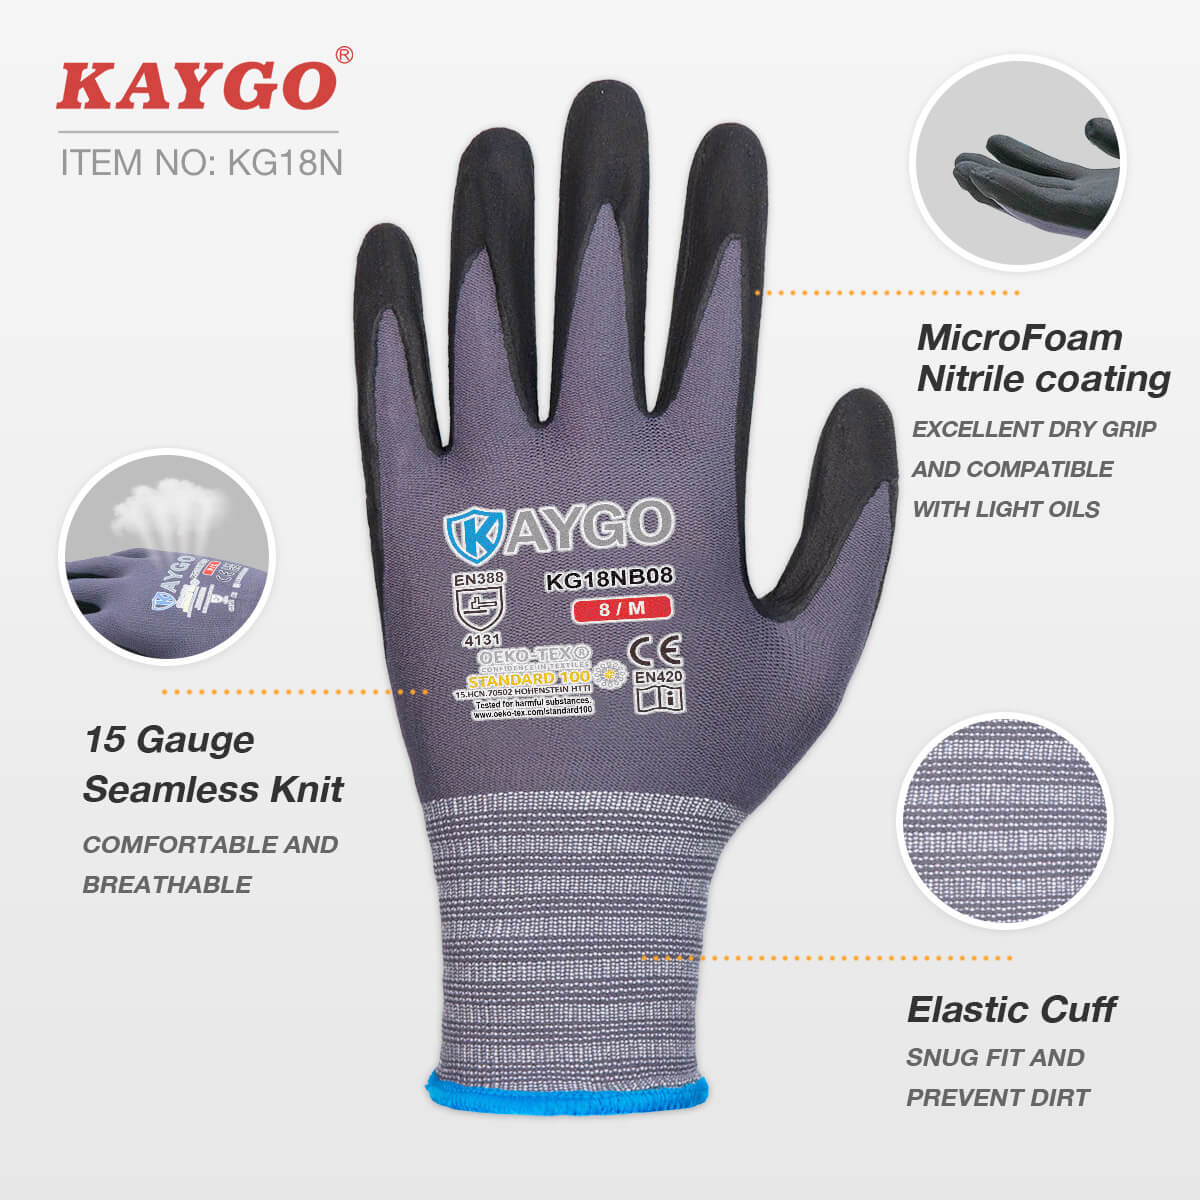 6 Pairs/12 Pairs Seamless Knit Nylon Work Gloves with Microfoam Nitrile Coated on Palm and Fingers